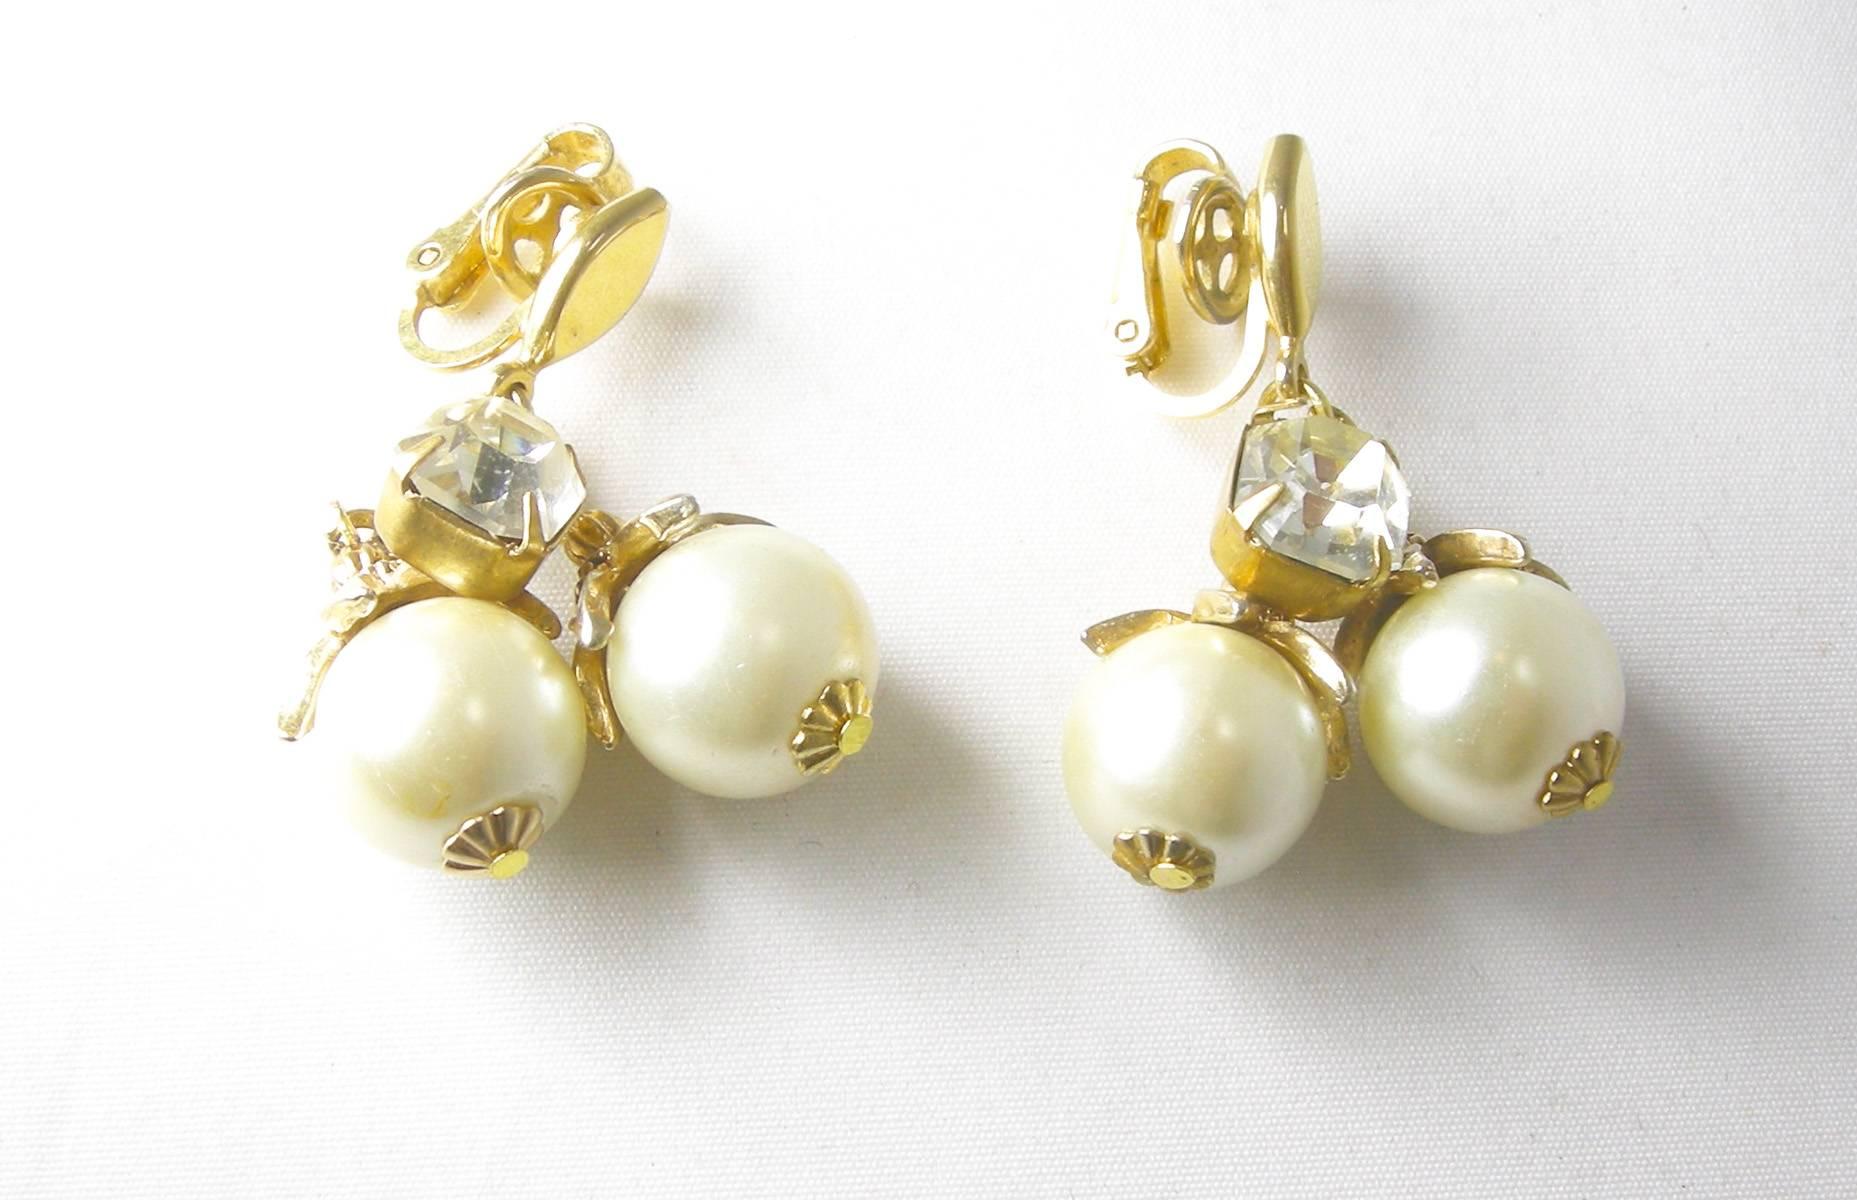 These vintage Trifari clip earrings have two large round faux pearls that hang on a link chain with a large sized bezel crystal.  They are set in a gold tone metal finish, measure 2” x 1”,  are signed with the crown “Trifari” and are in excellent